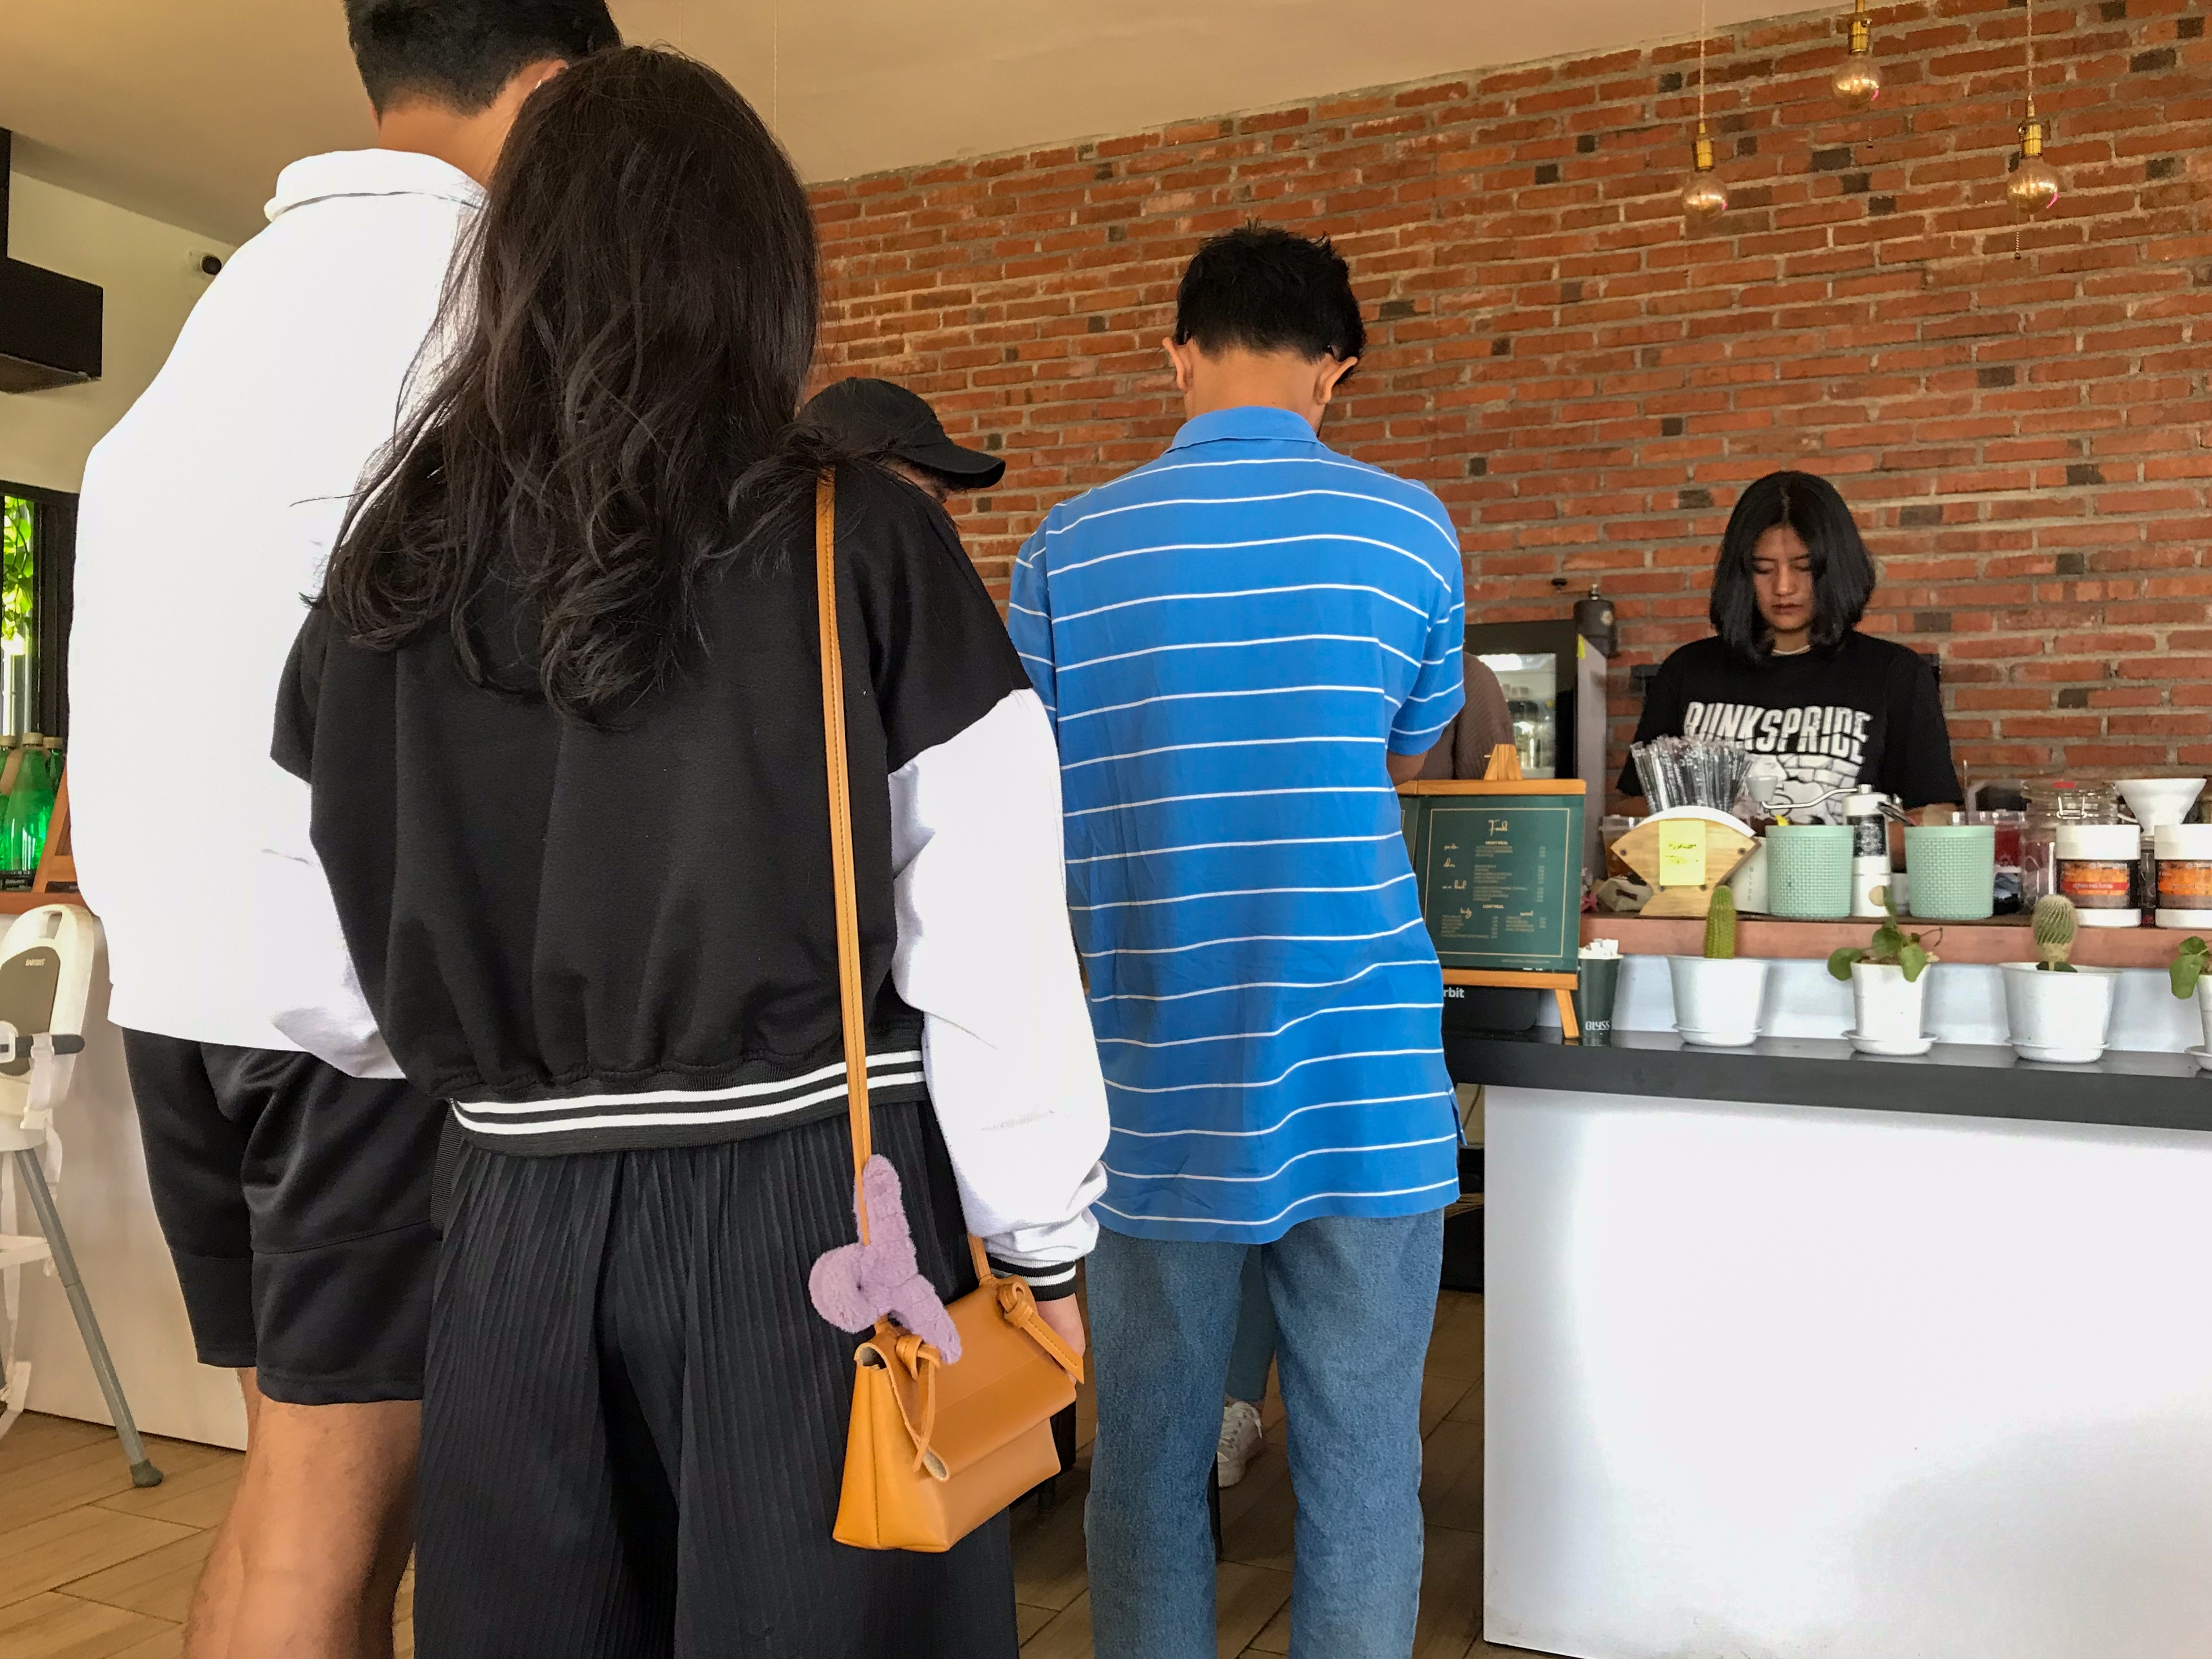 People queueing at a coffee shop | Source: Shutterstock